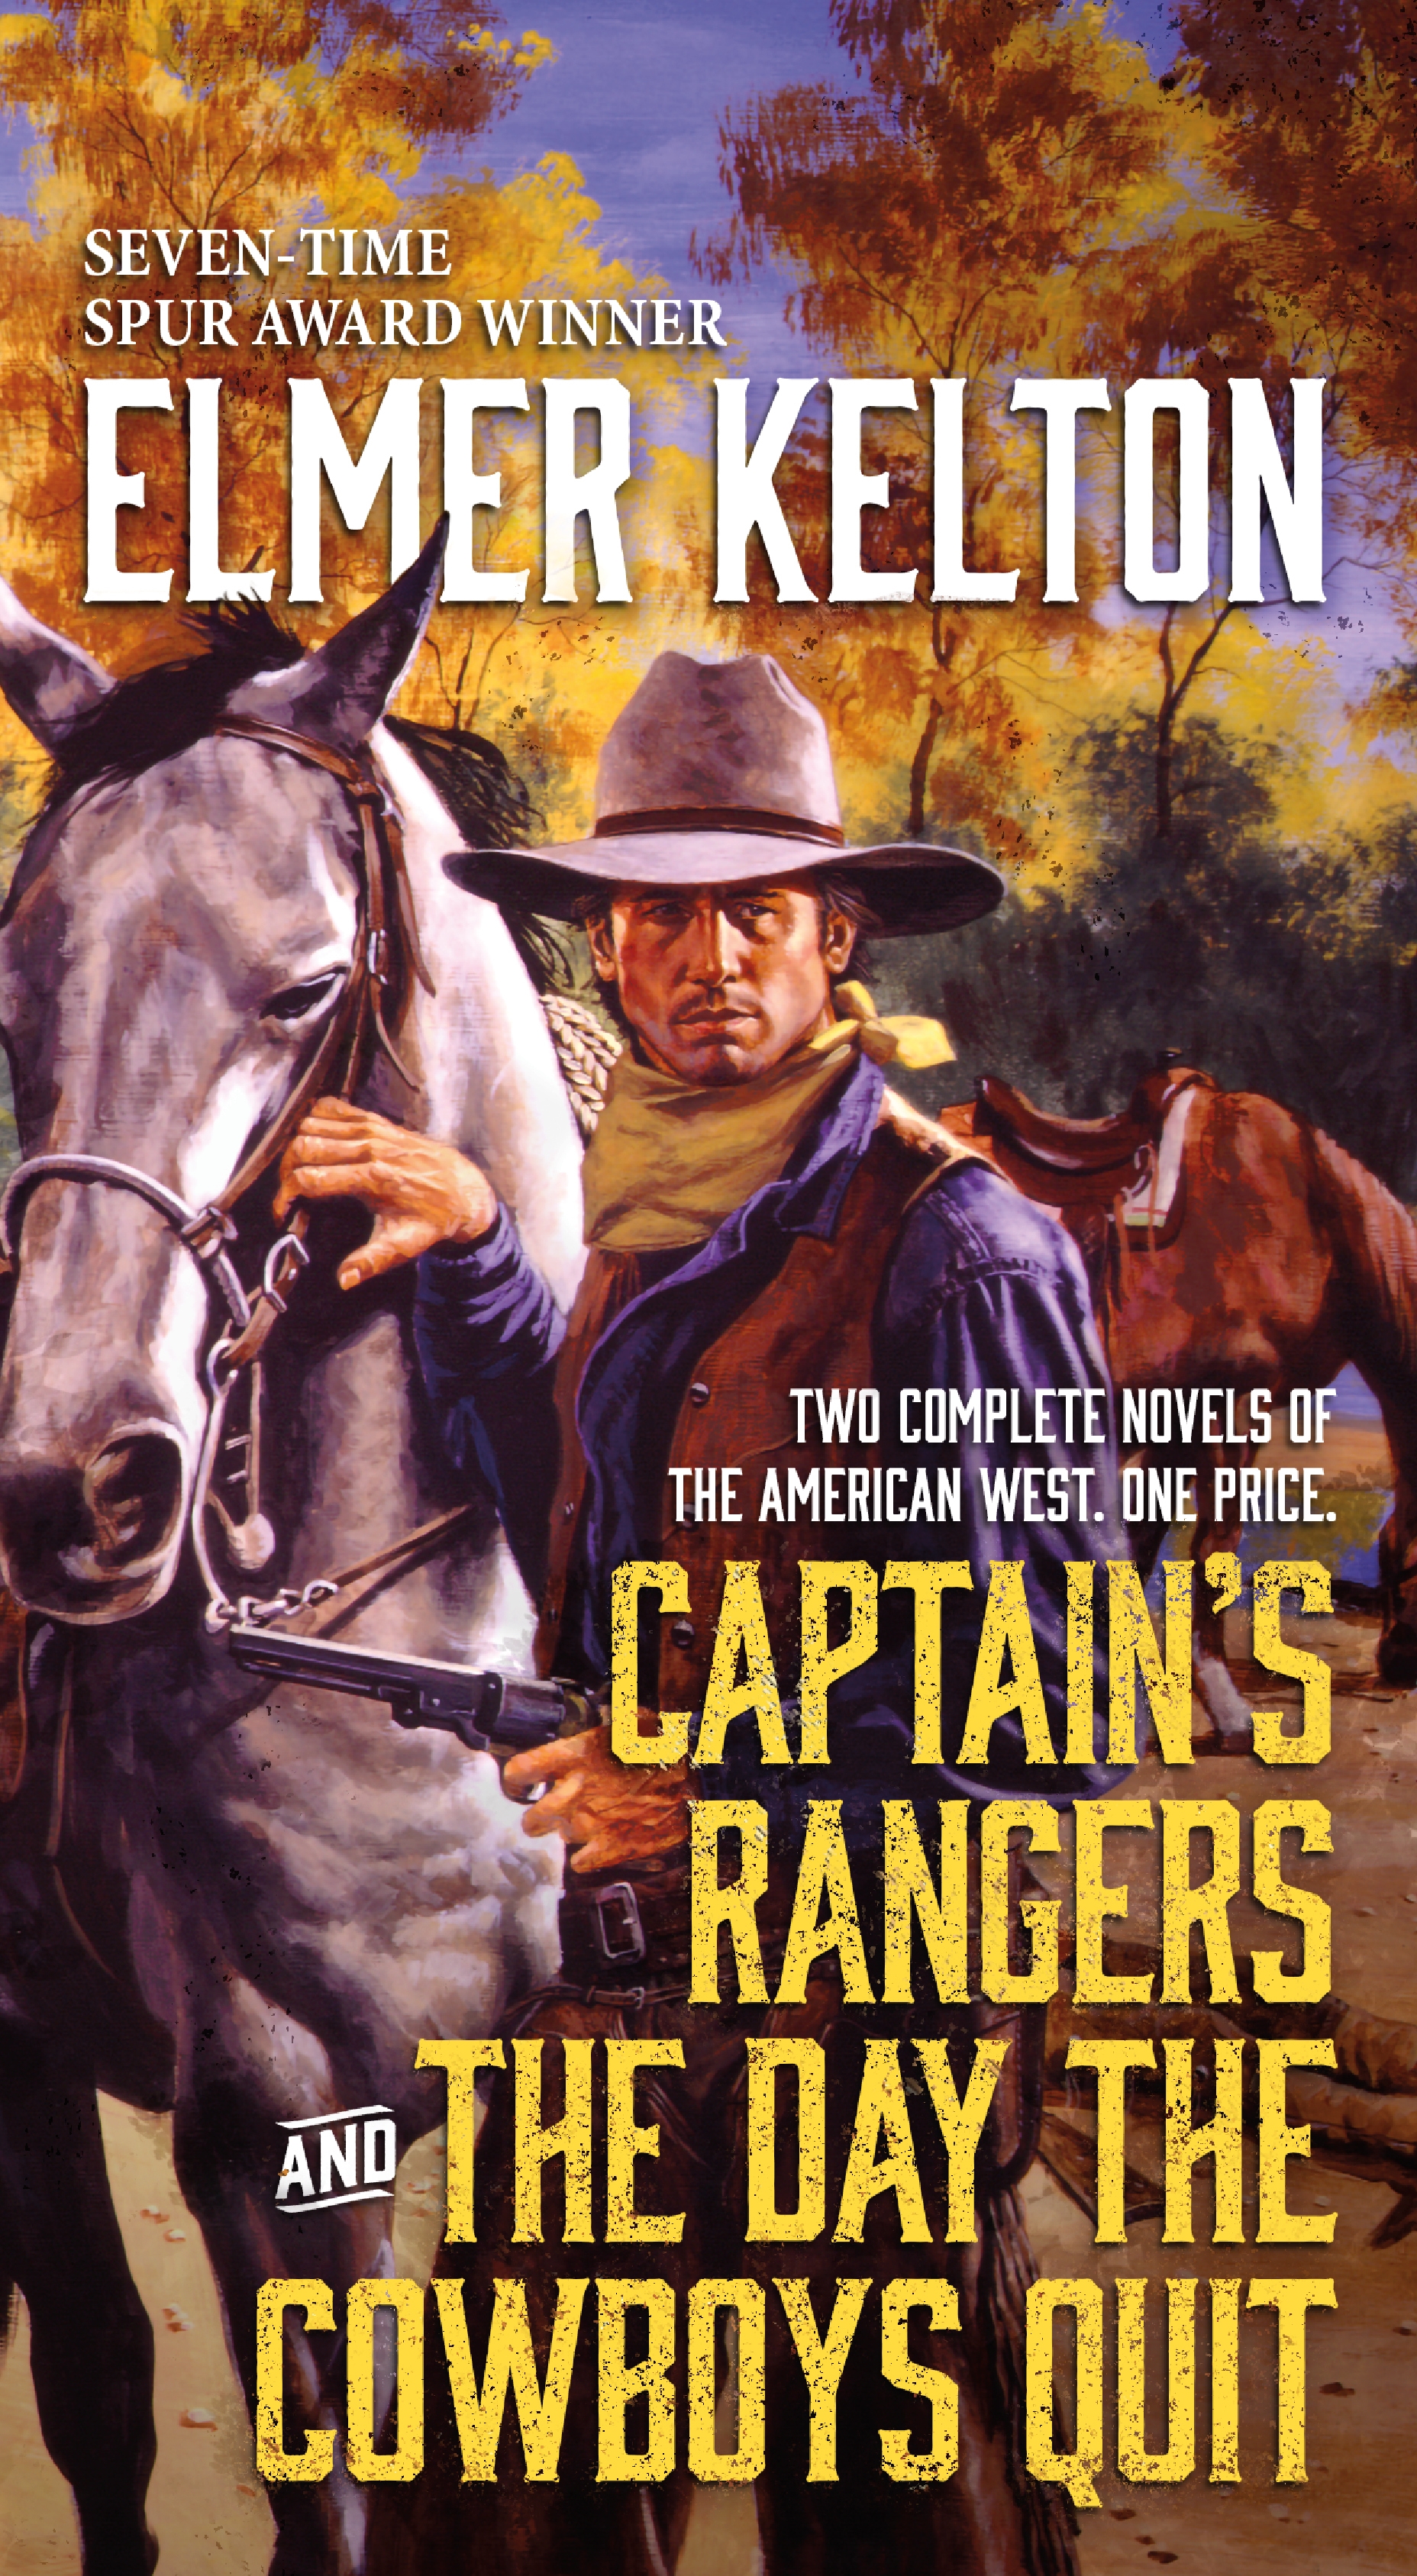 Captain's Rangers and The Day the Cowboys Quit : Two Complete Novels of the American West by Elmer Kelton